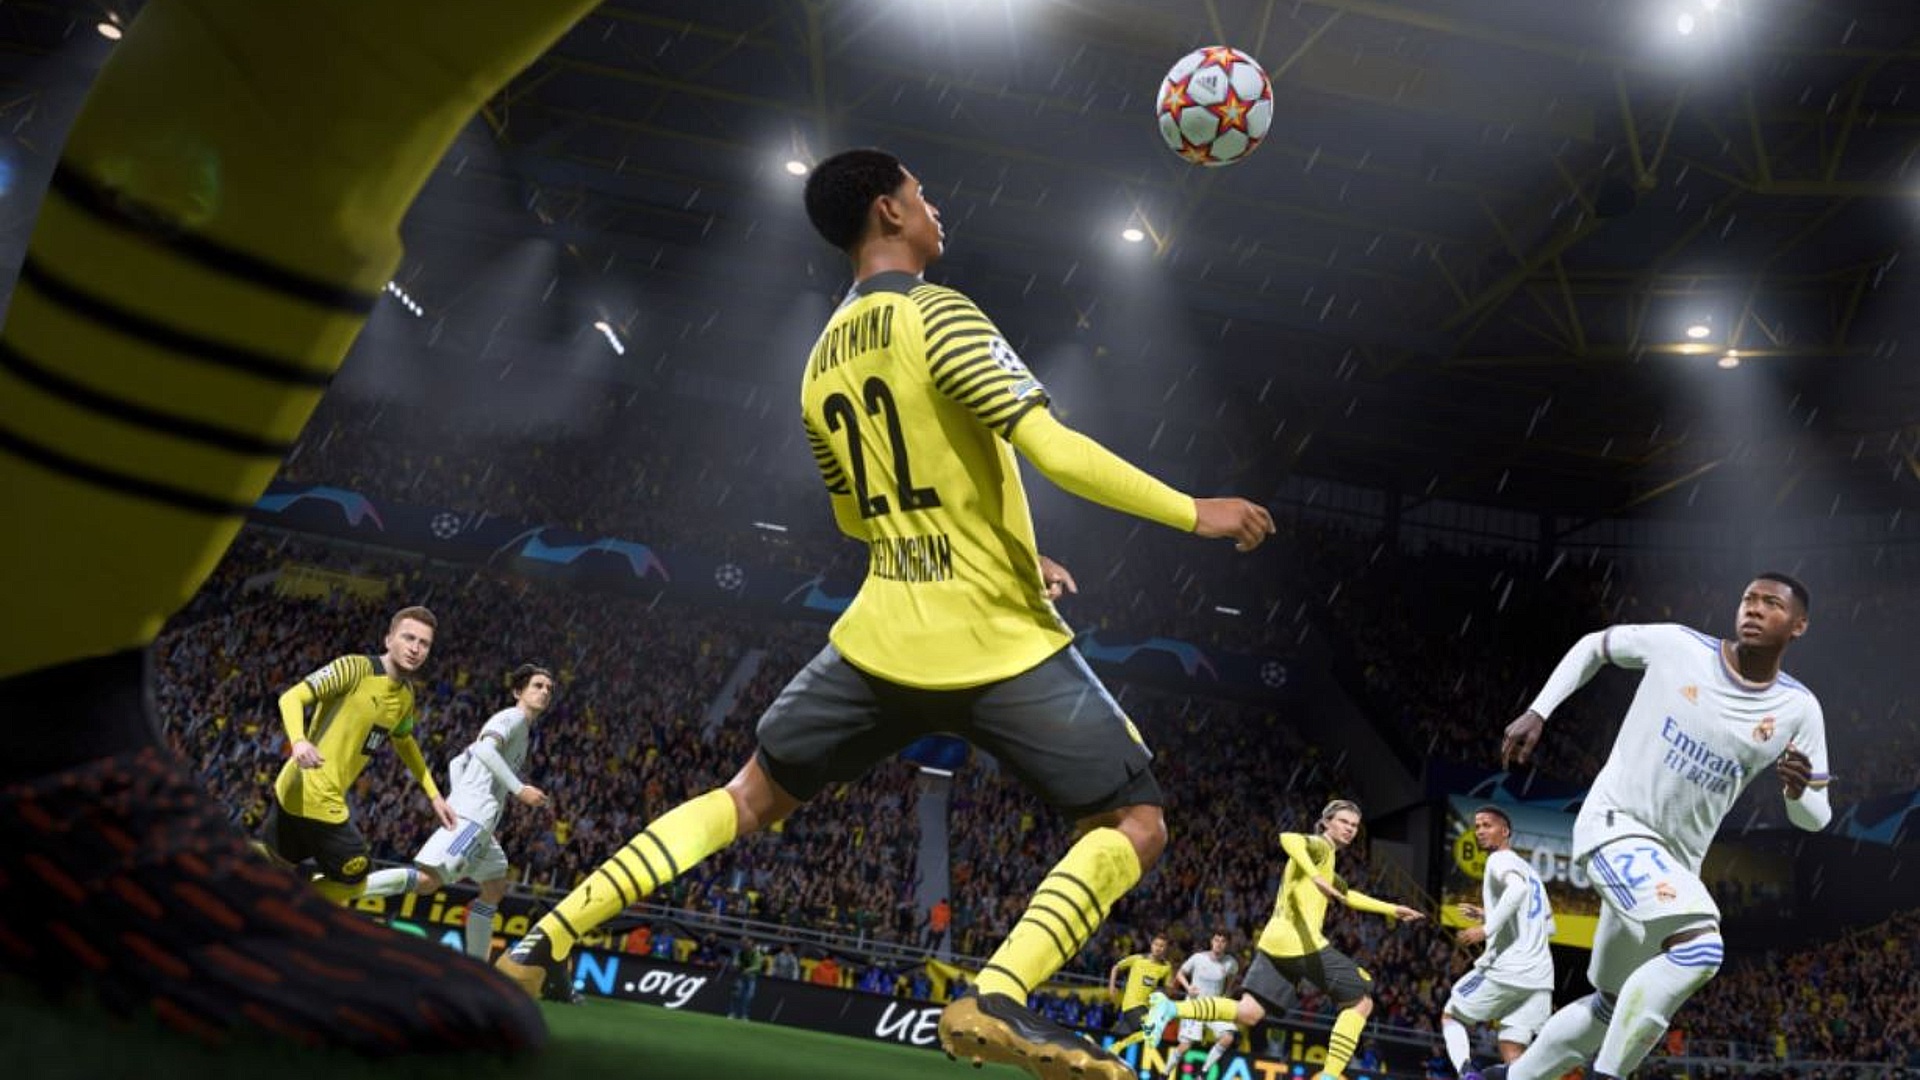 FIFA 22 HyperMotion: FIFA 22 screenshot of Dortmund's Jude Bellingham, wearing a yellow and black kit, controlling a football with his chest.